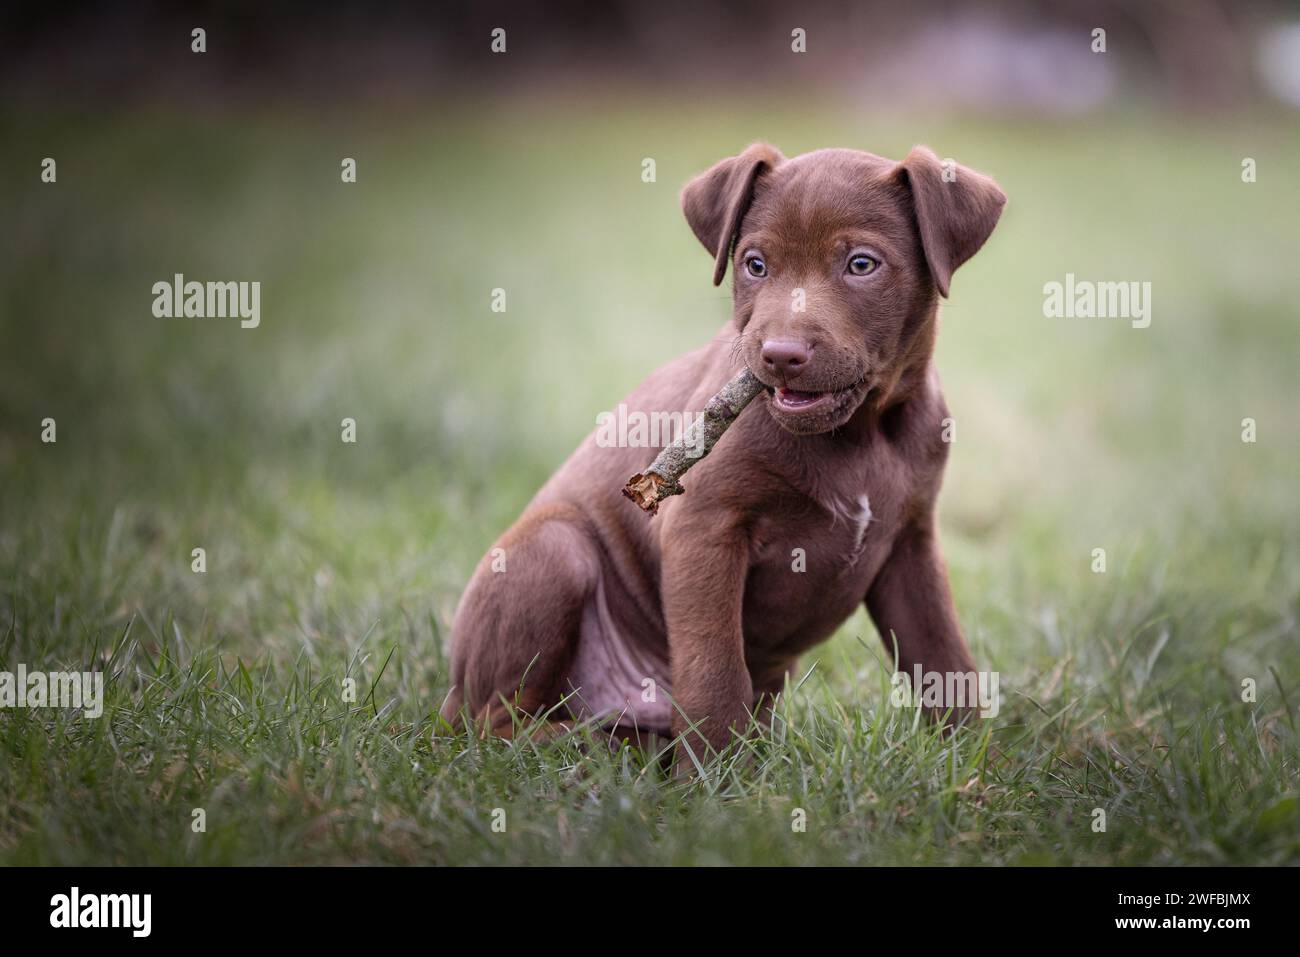 Very cute adorable brown Patterdale terrier puppy  sitting on a patch of grass playing with a stick Stock Photo